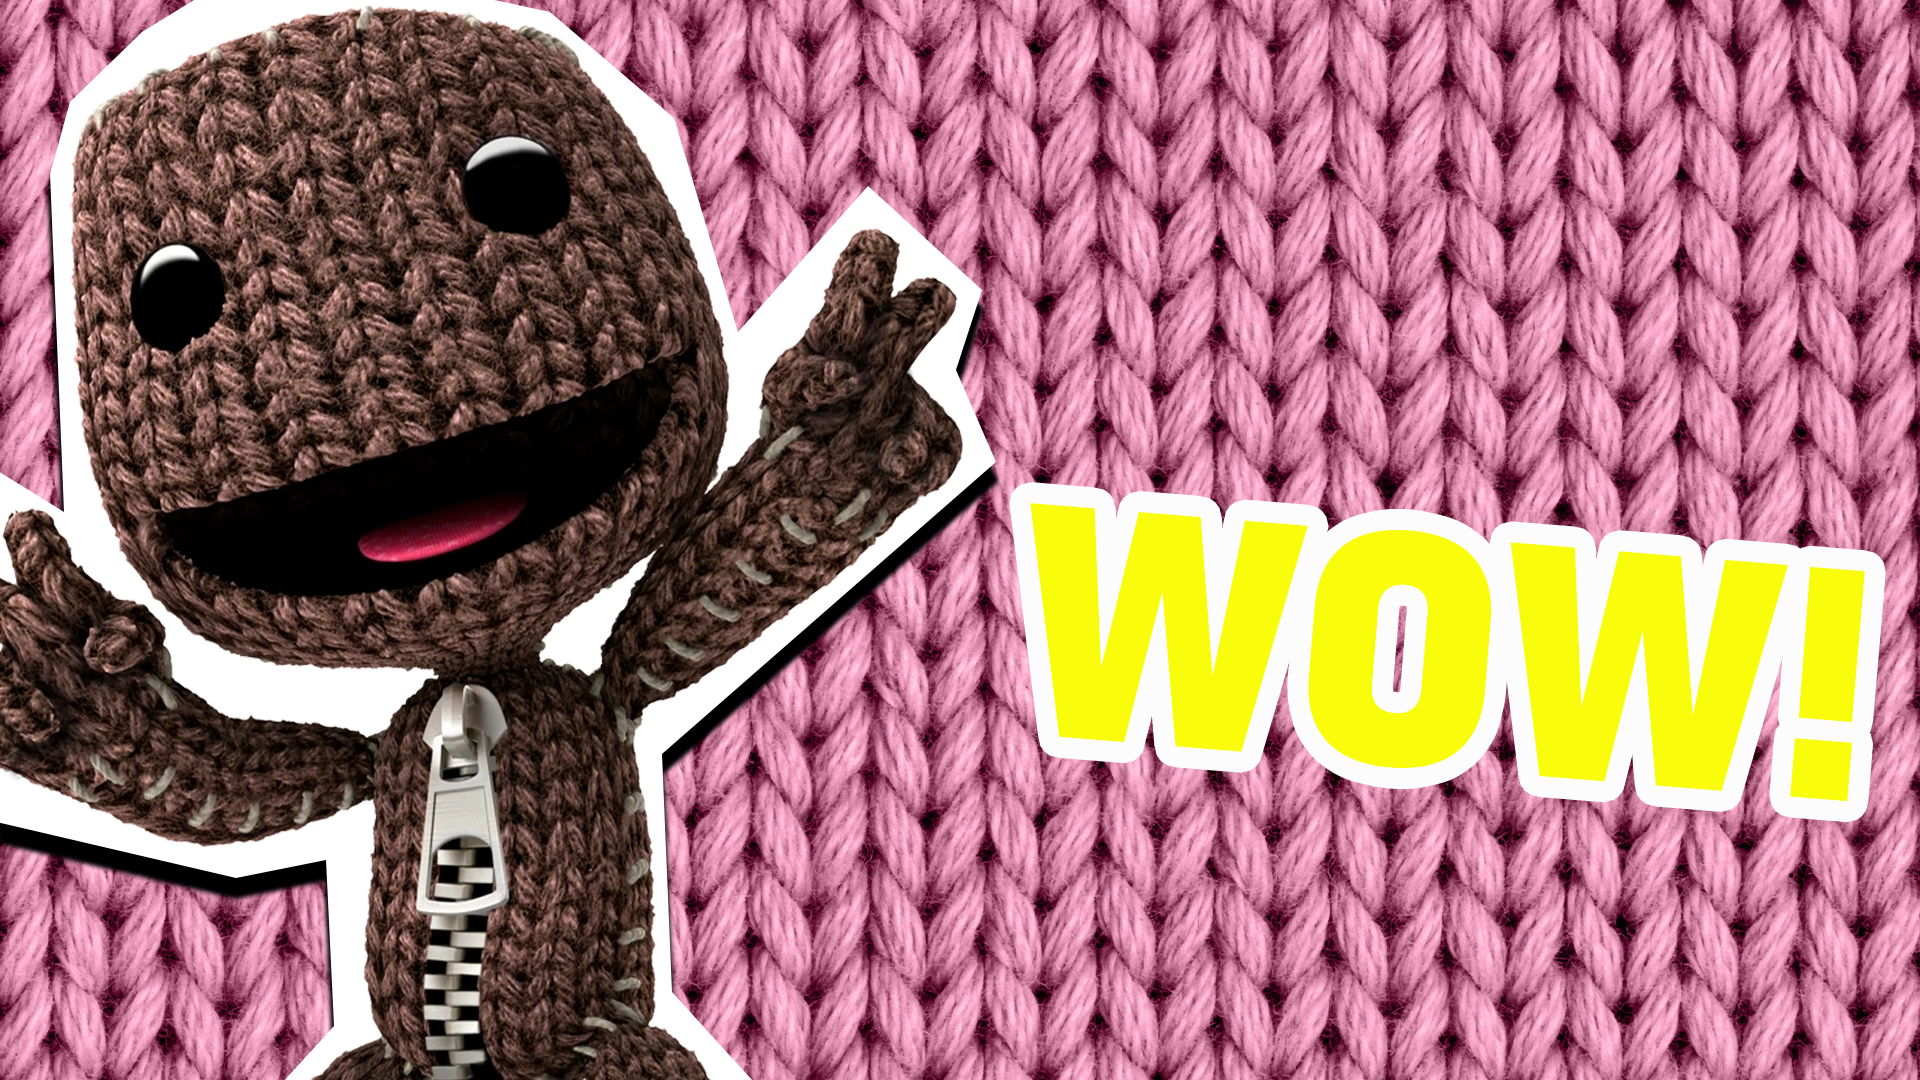 Brilliant! You're truly LittleBigPlanet's best player, because you scored 100%! Congrats!